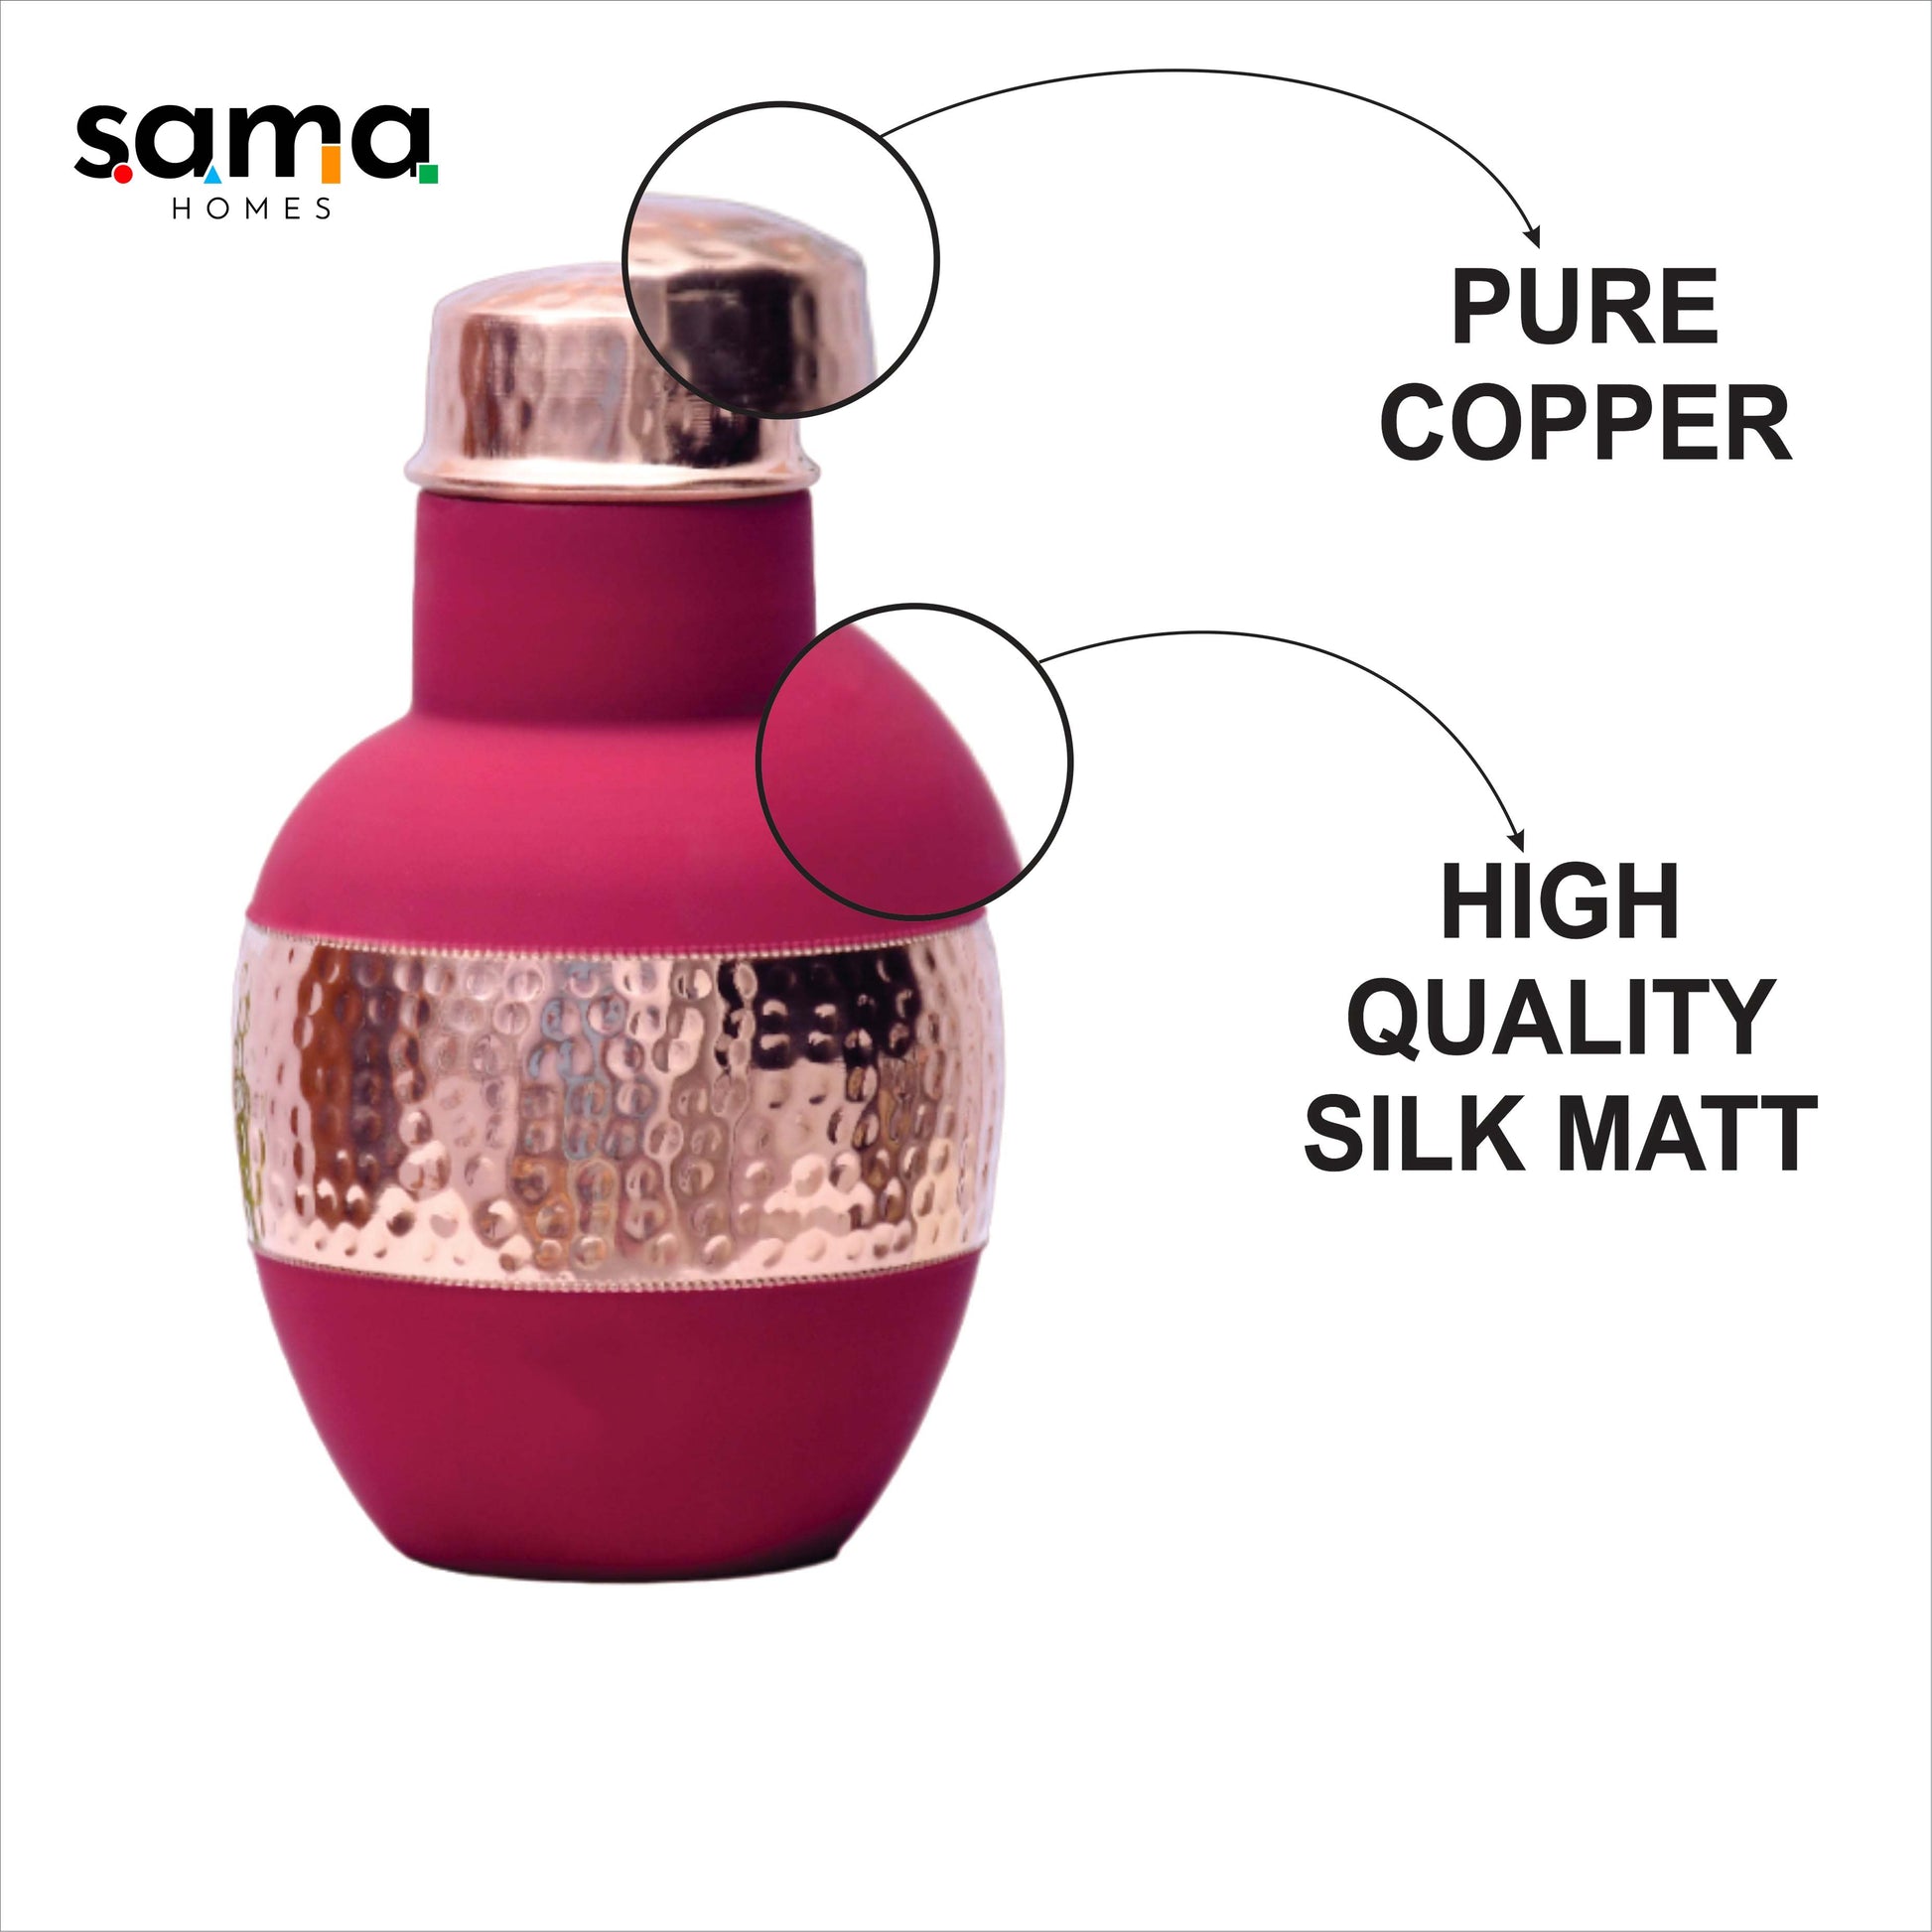 SAMA Homes - pure copper silk red cherry apple pot with inbuilt glass capacity 1200ml